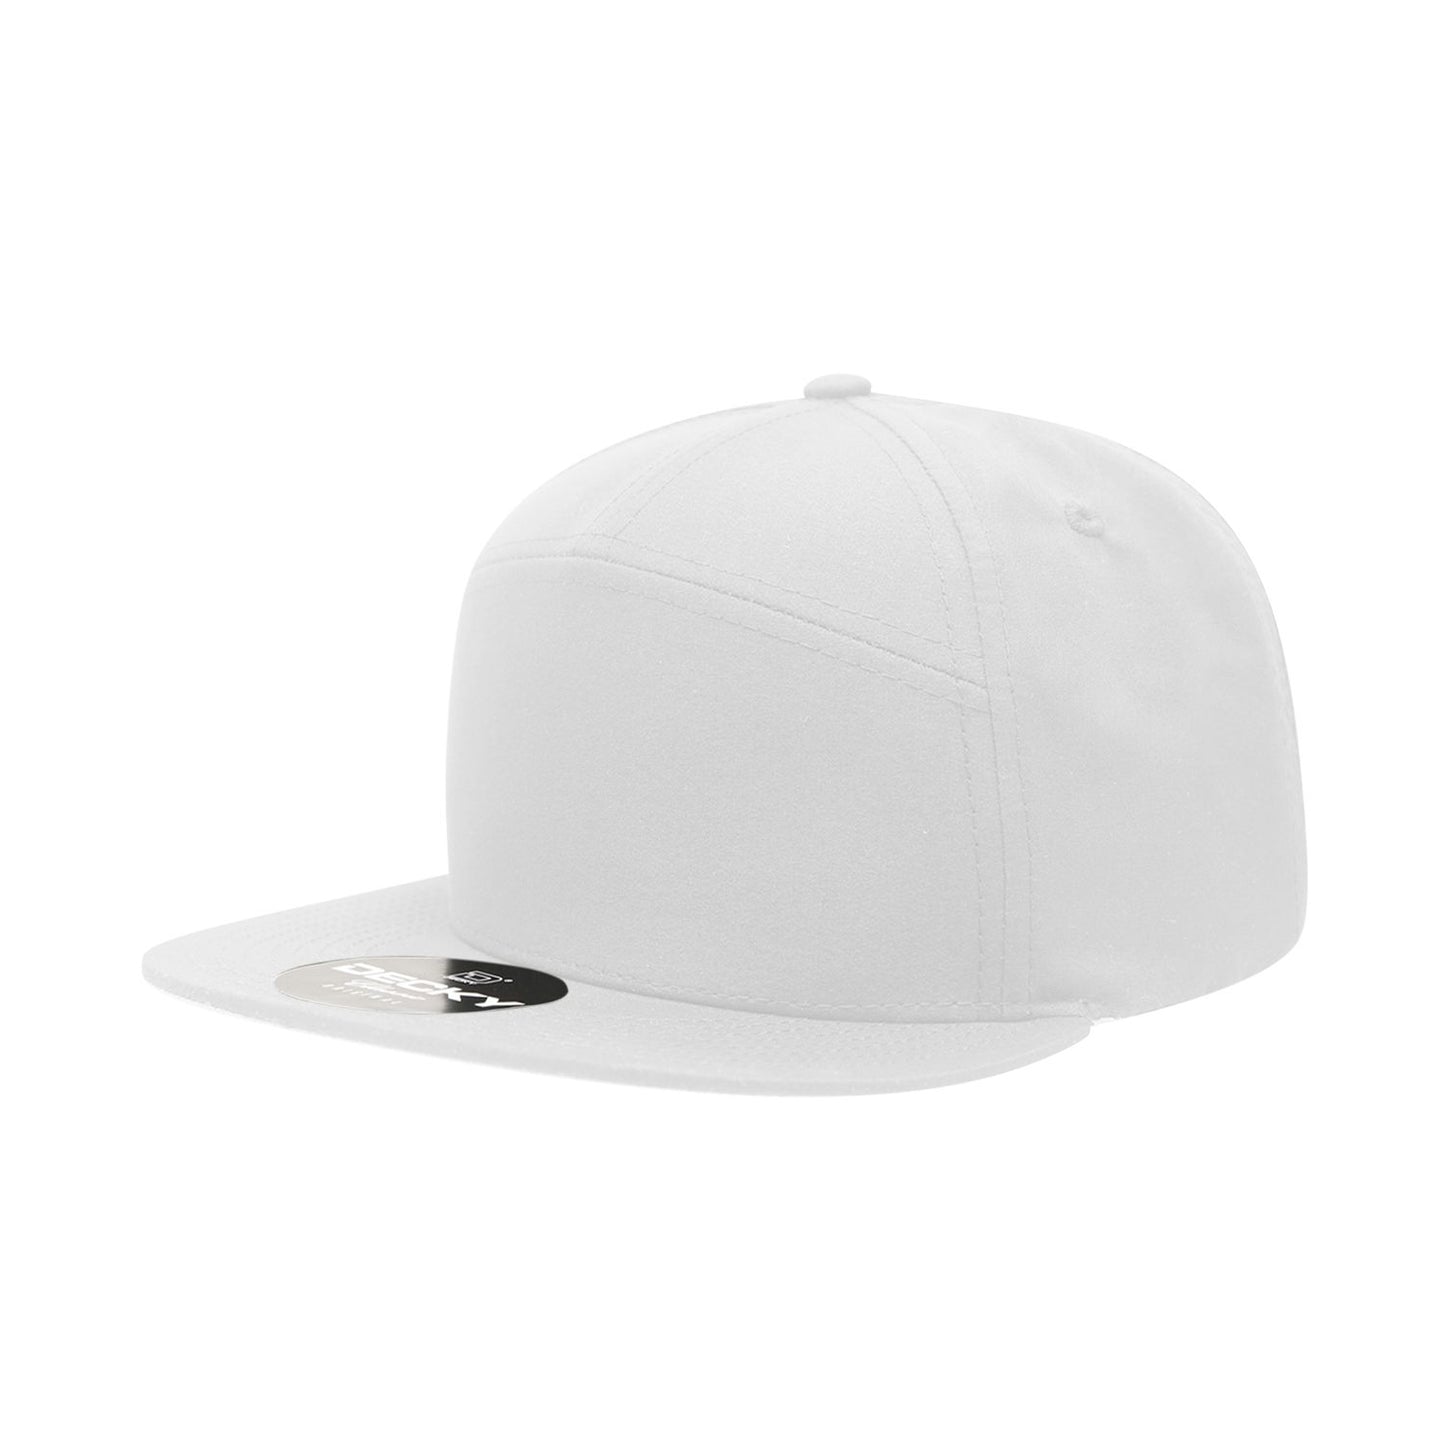 Decky 6229 7 Panel High Profile Structured Performance Cap - Blank